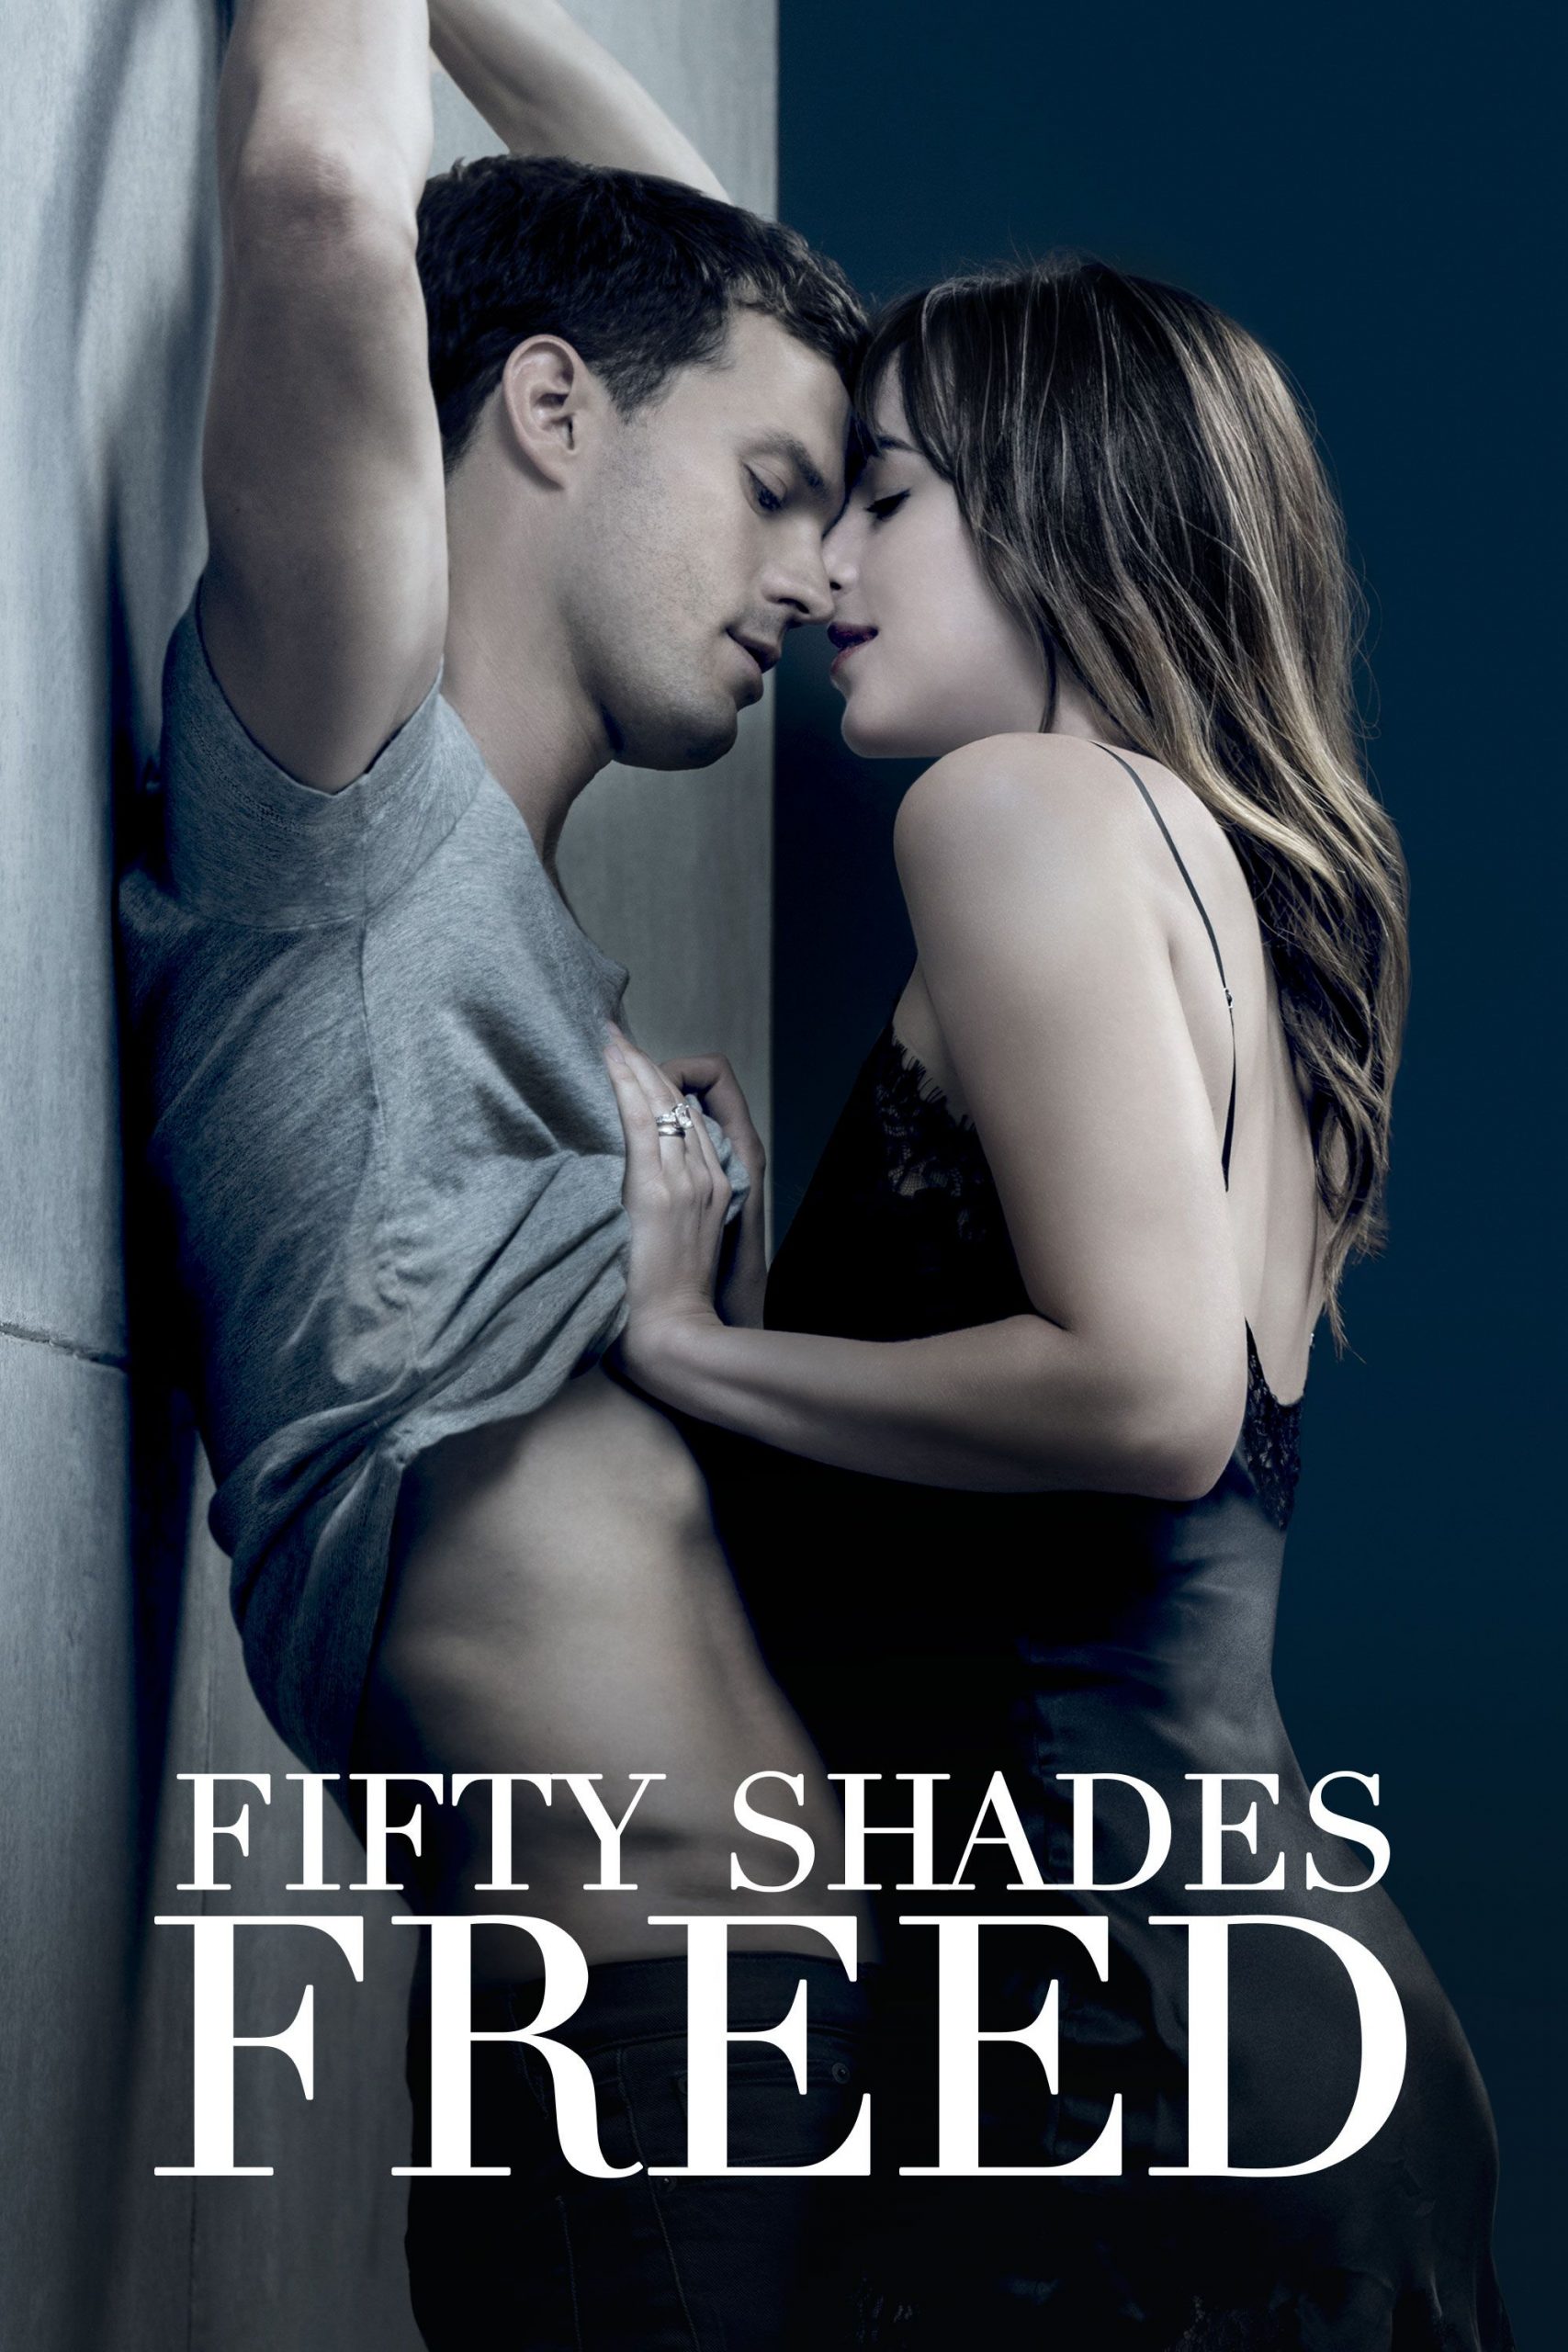 [18+] Fifty Shades Freed (2018)